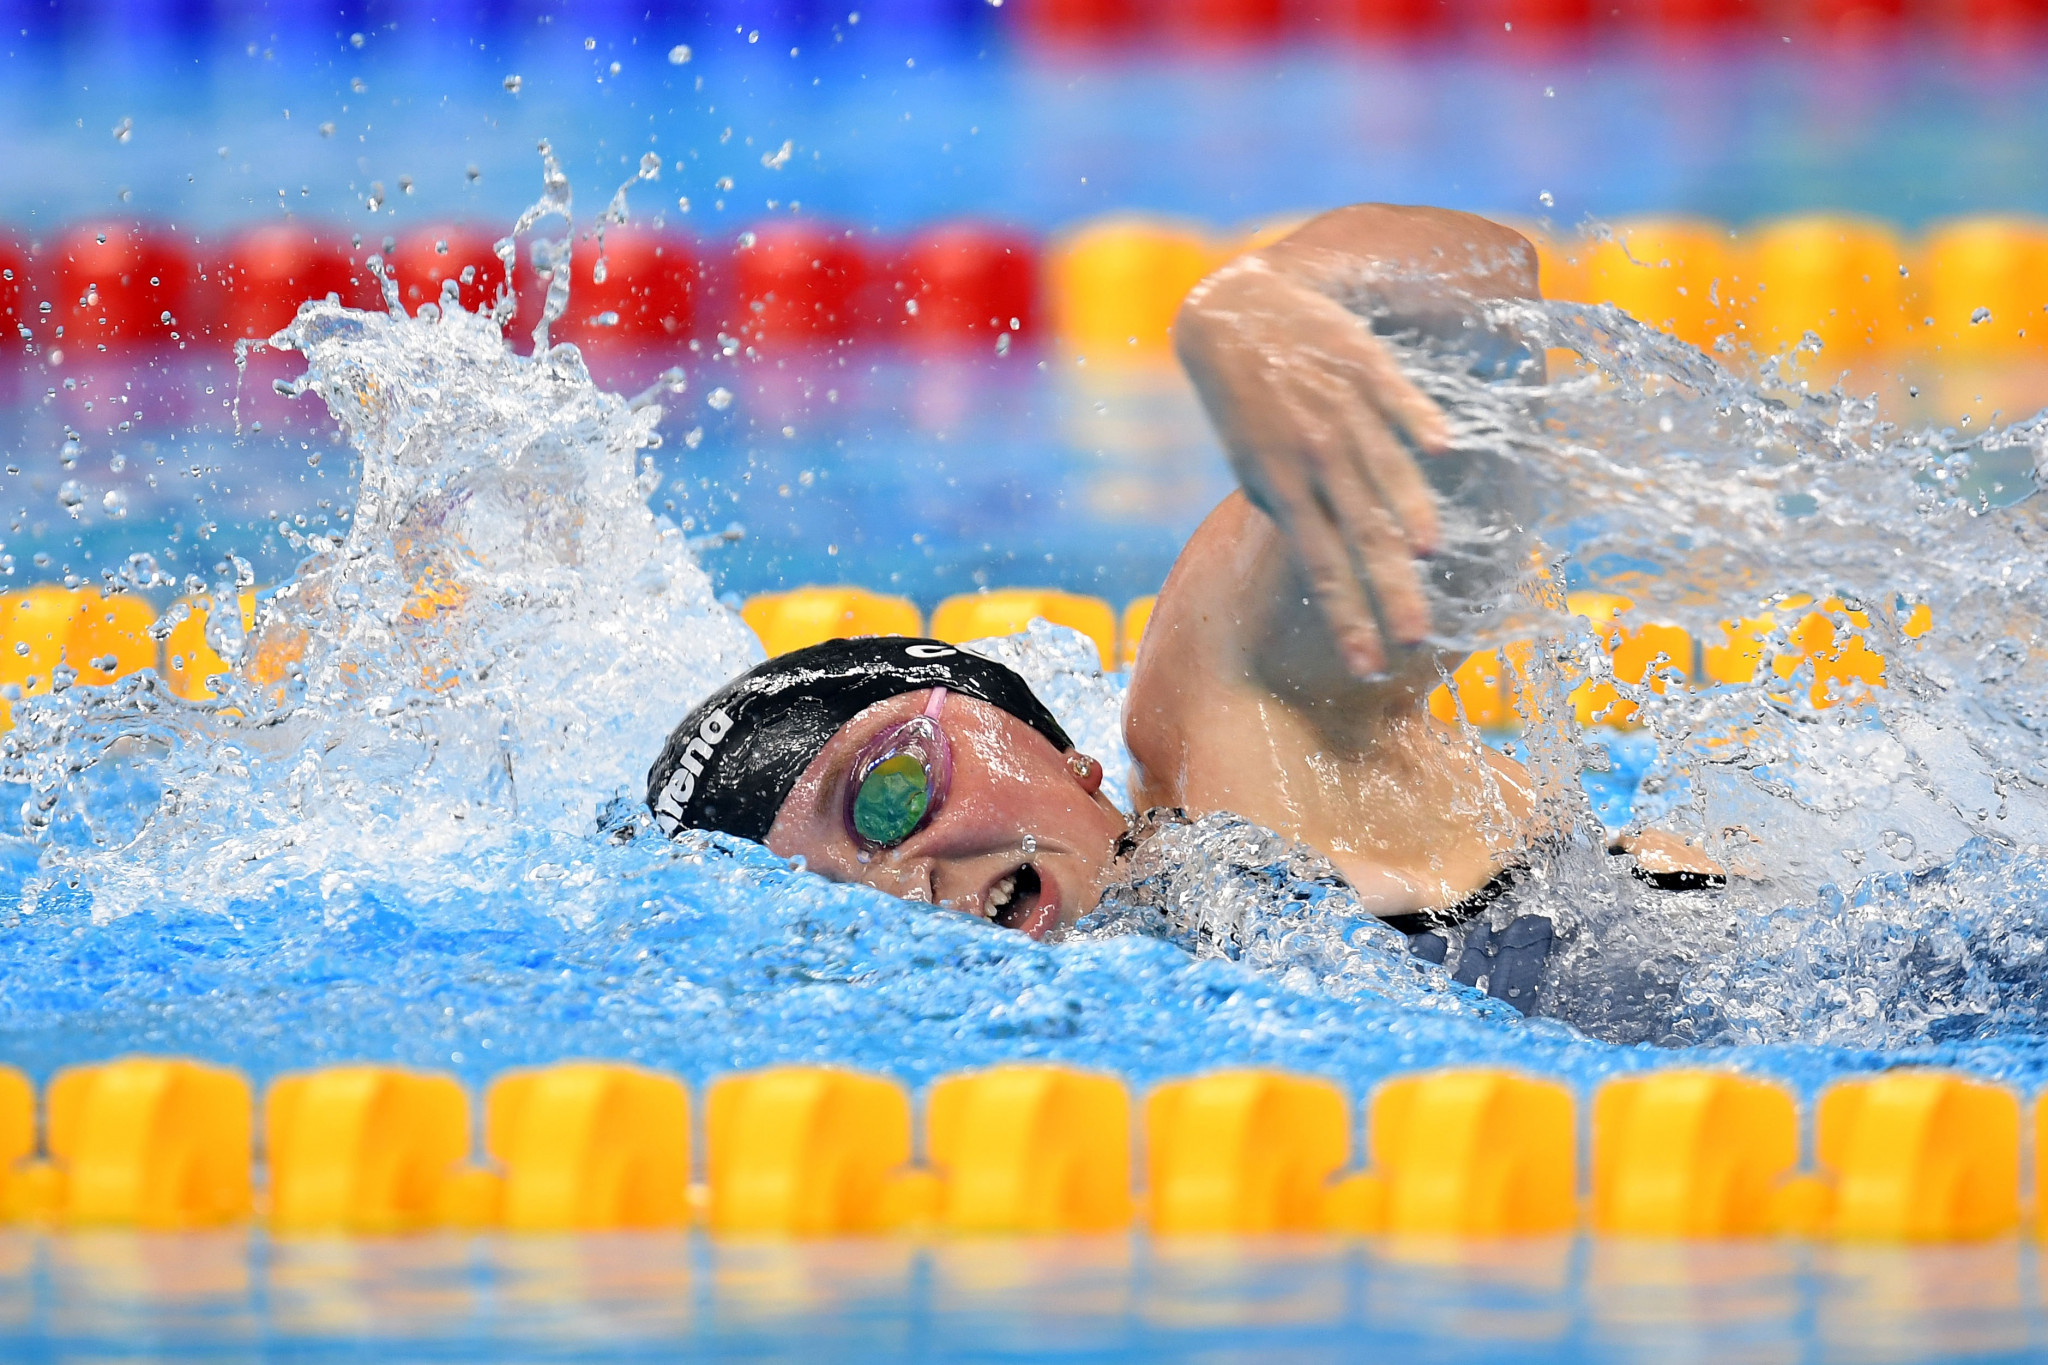 McKenzie Coan set an American record in the S7 400m freestyle event ©Getty Images